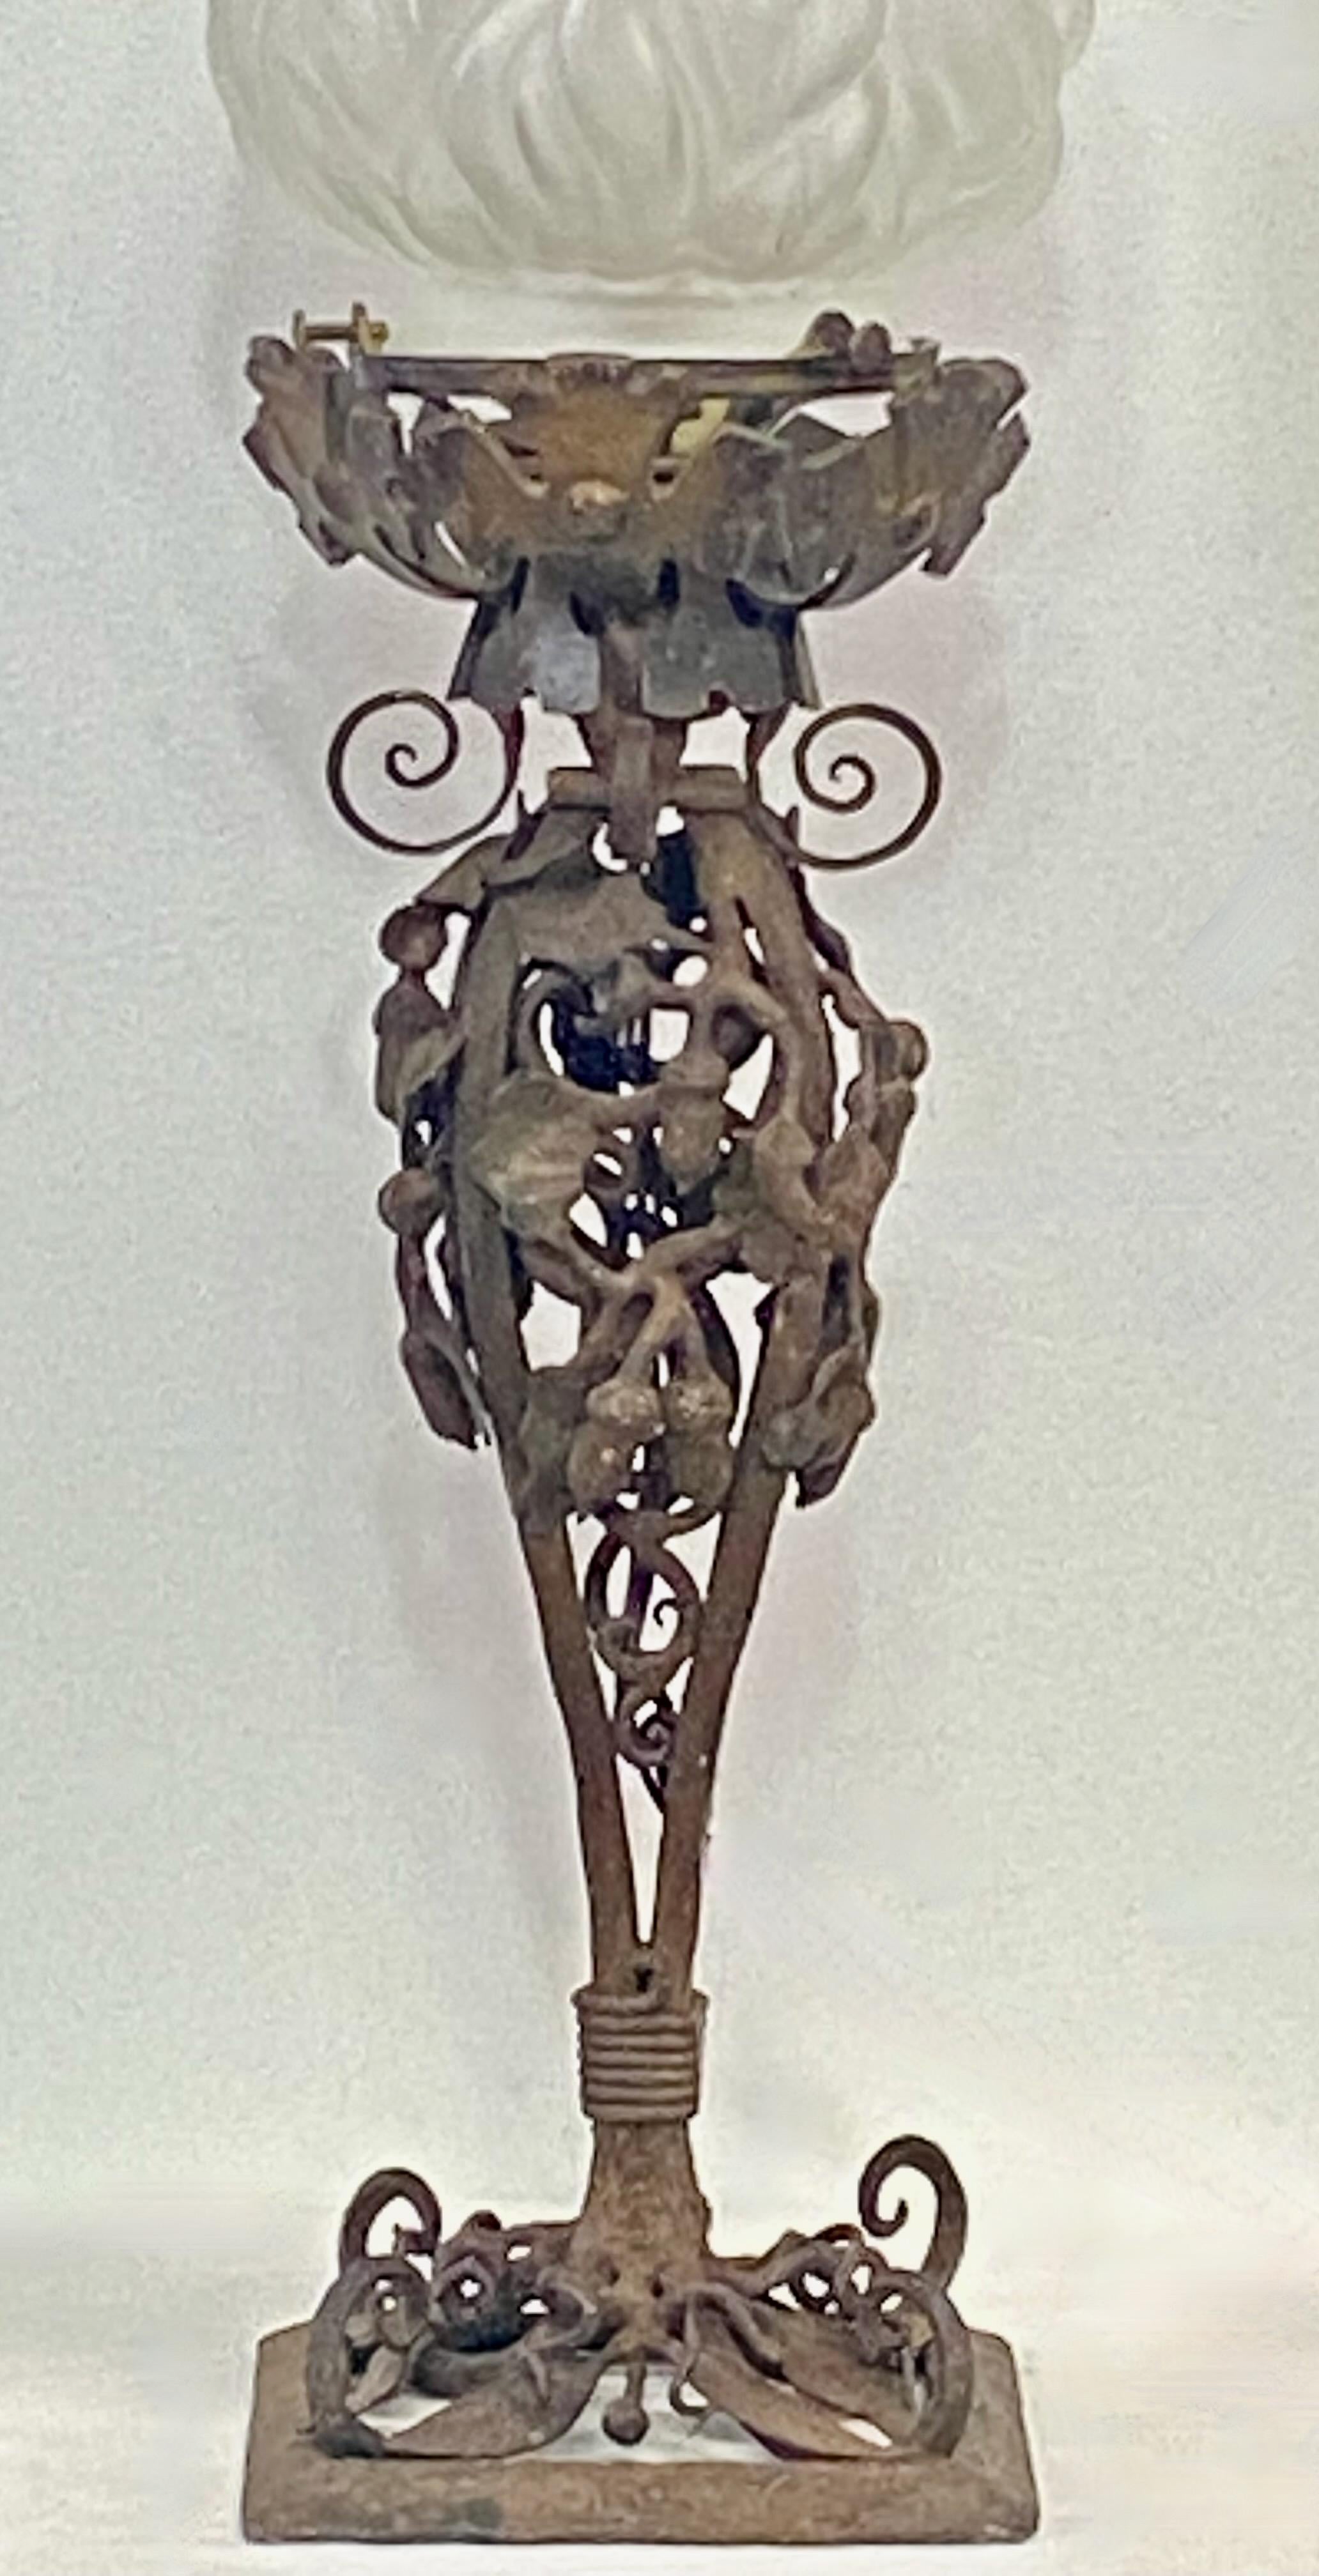 An exceptional wrought iron lamp base. We believe this was probably a custom crafted gas newel post lamp originally. A considerable amount of skilled workmanship went into the iron work with an Art Nouveau design of acorns and oak leaves. The flame